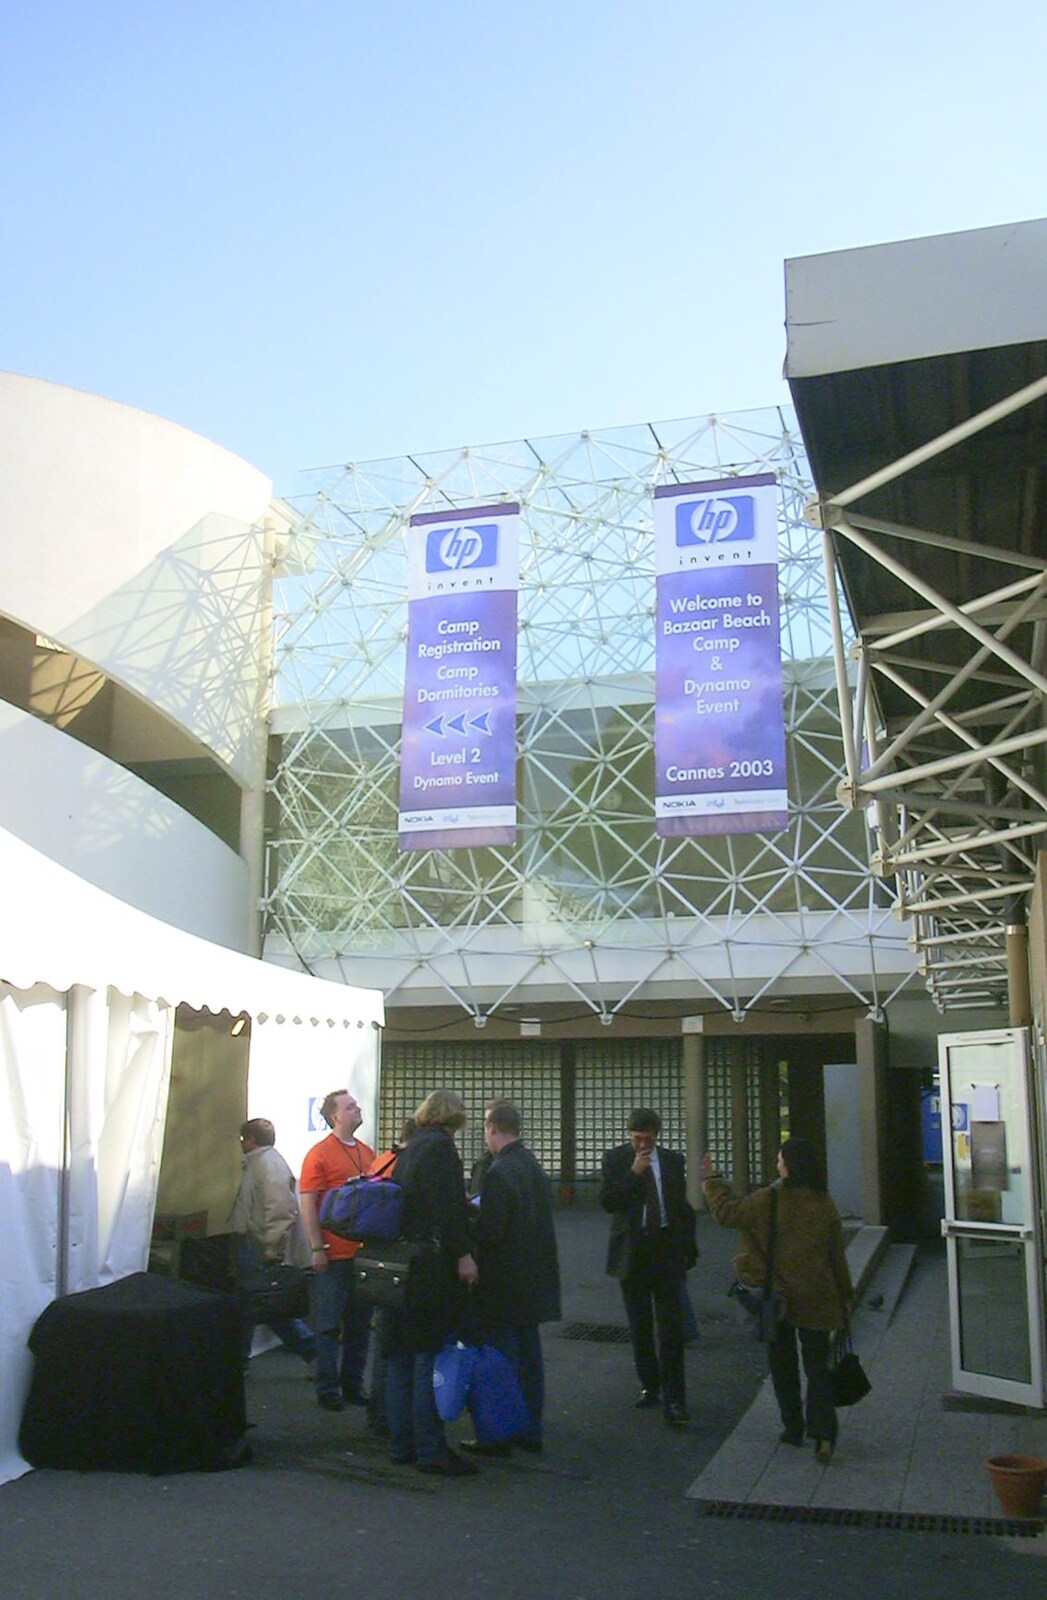 The entrance to HP's Bazaar from 3G Lab at the 3GSM Conference, Cannes, France - 17th February 2003